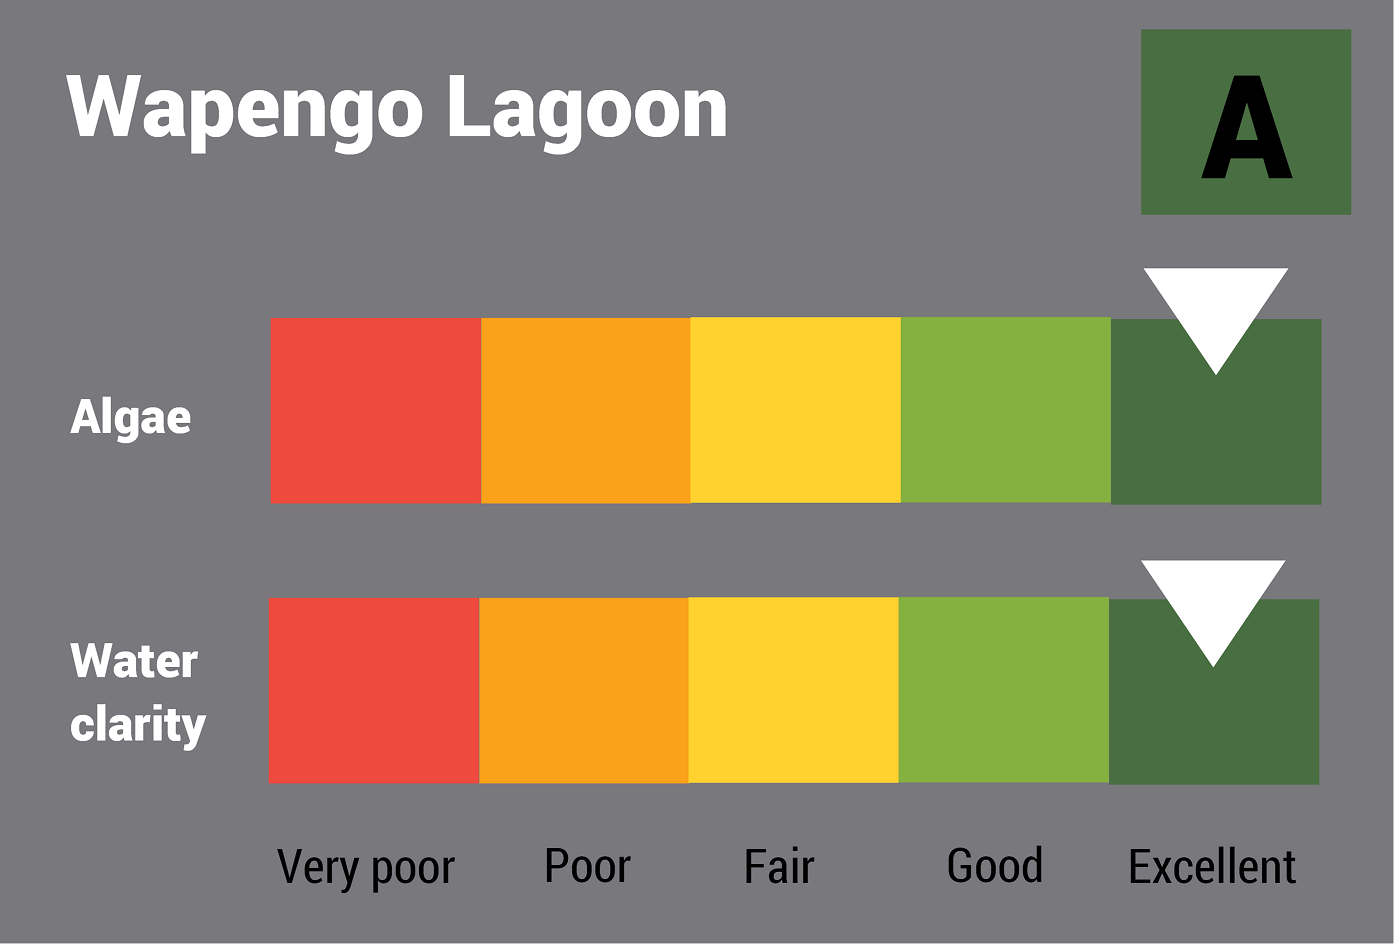 Wapengo Lagoon water quality report card for algae and water clarity showing colour-coded ratings (red, orange, yellow, light green and dark green, which represent very poor, poor, fair, good and excellent, respectively). Algae is rated 'excellent' and water clarity is rated 'excellent' giving an overall rating of 'excellent' or 'A'.